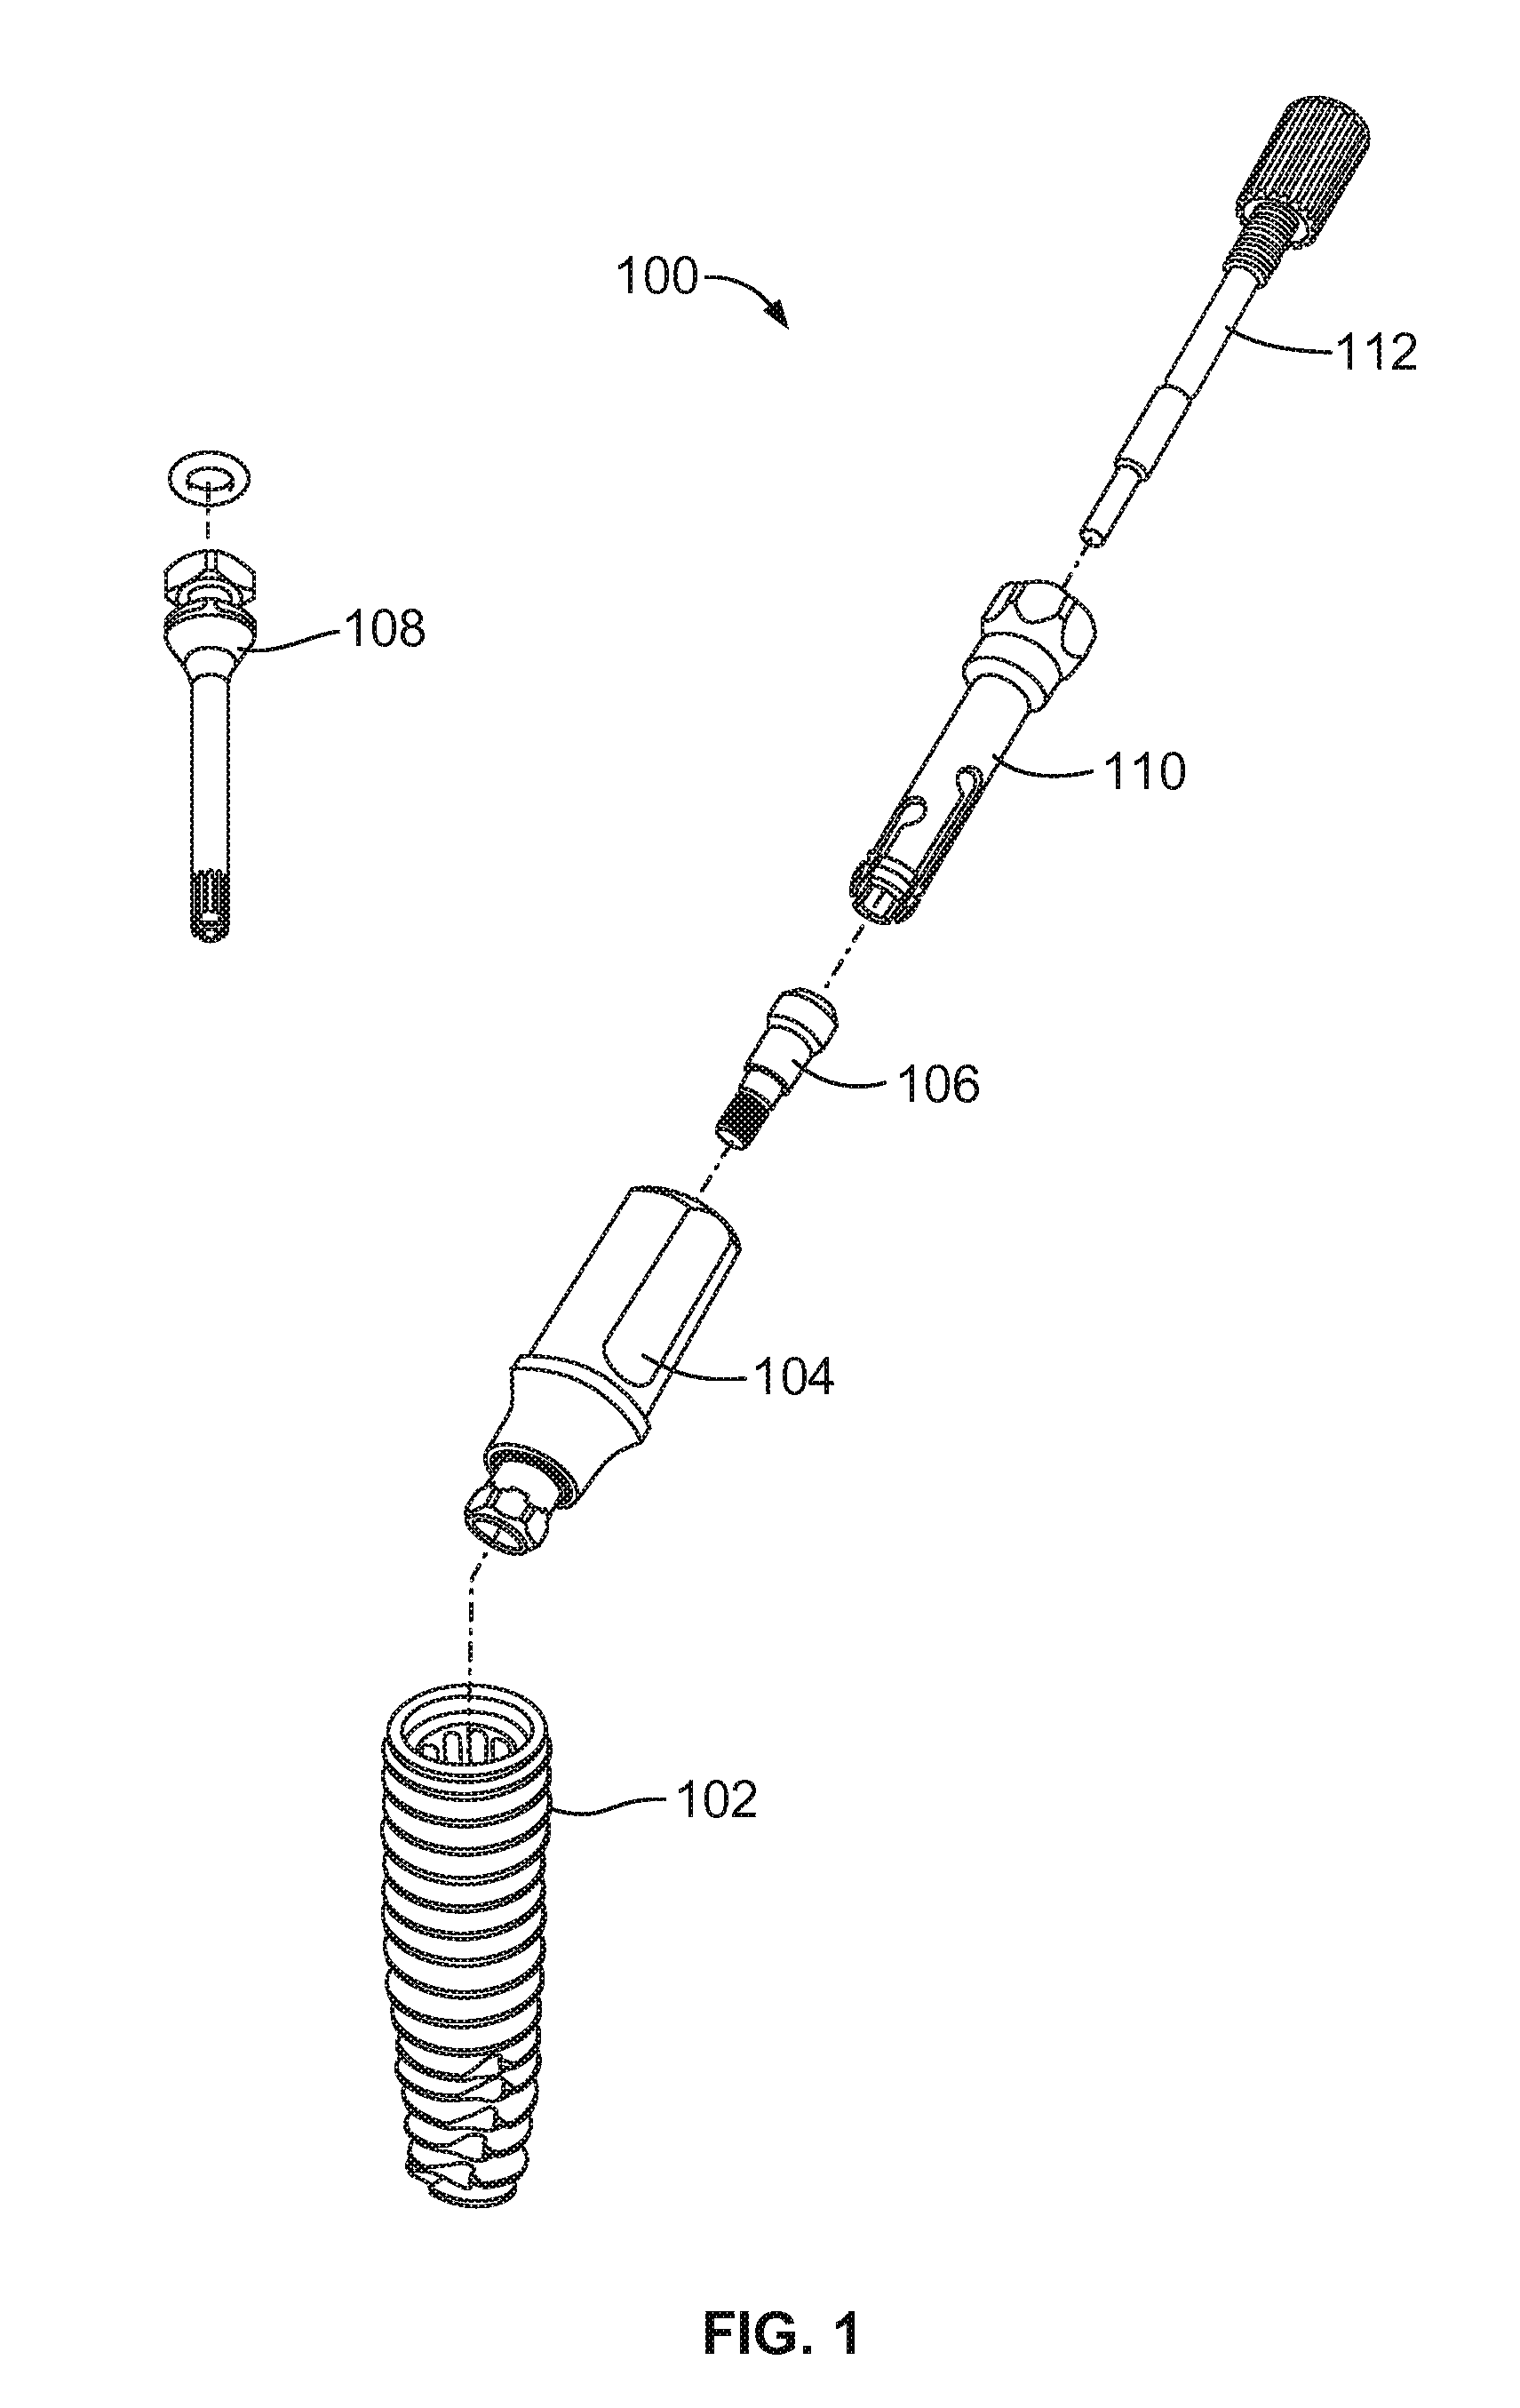 System and Method fo Dental Implant and Interface to Abutment For Restoration